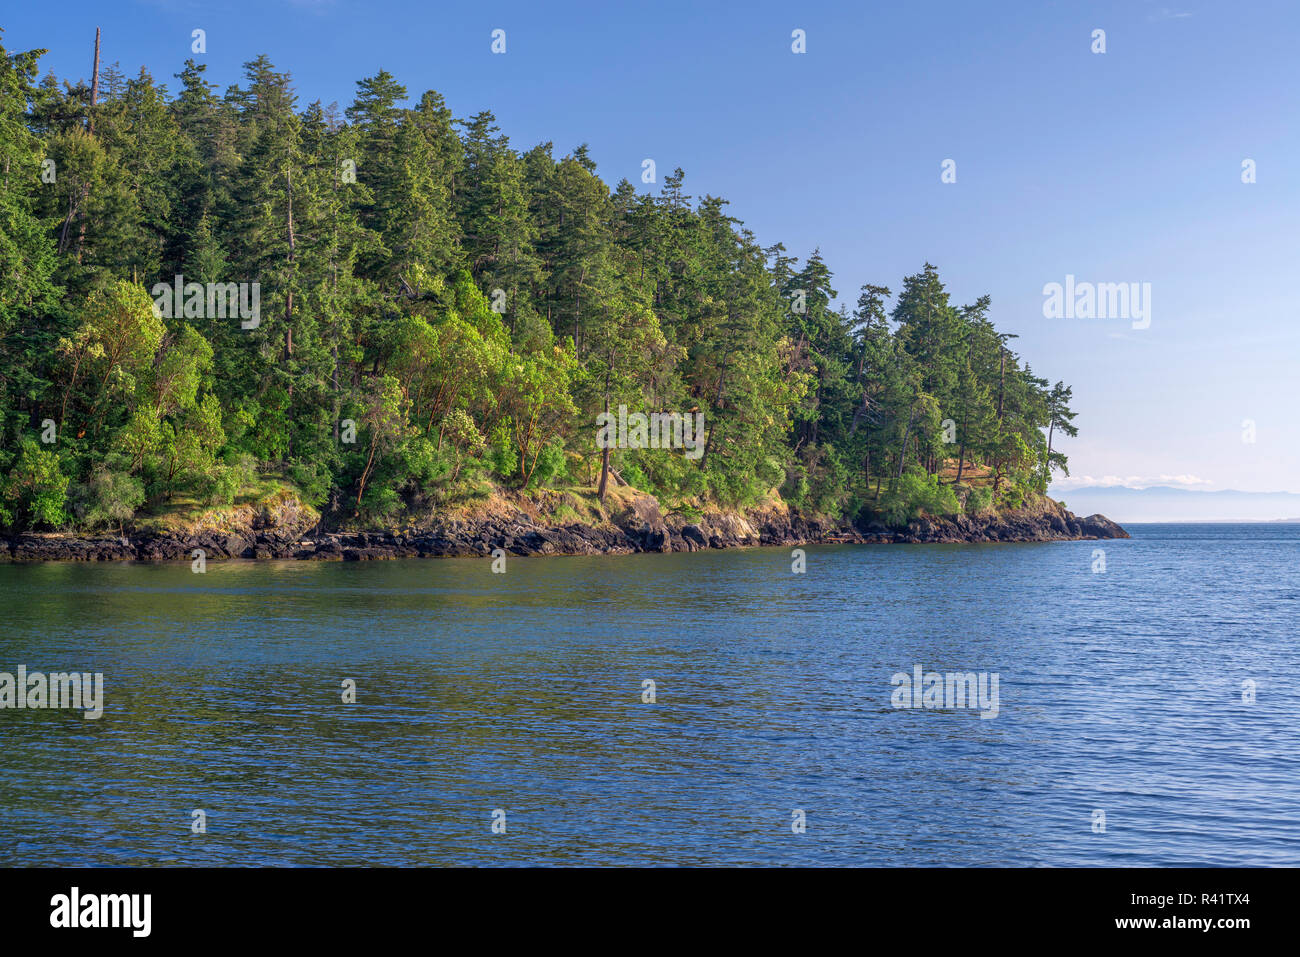 USA, Washington State, San Juan Island, Forest of Pacific madrone and Douglas fir above rocky shoreline at San Juan County Park. Stock Photo